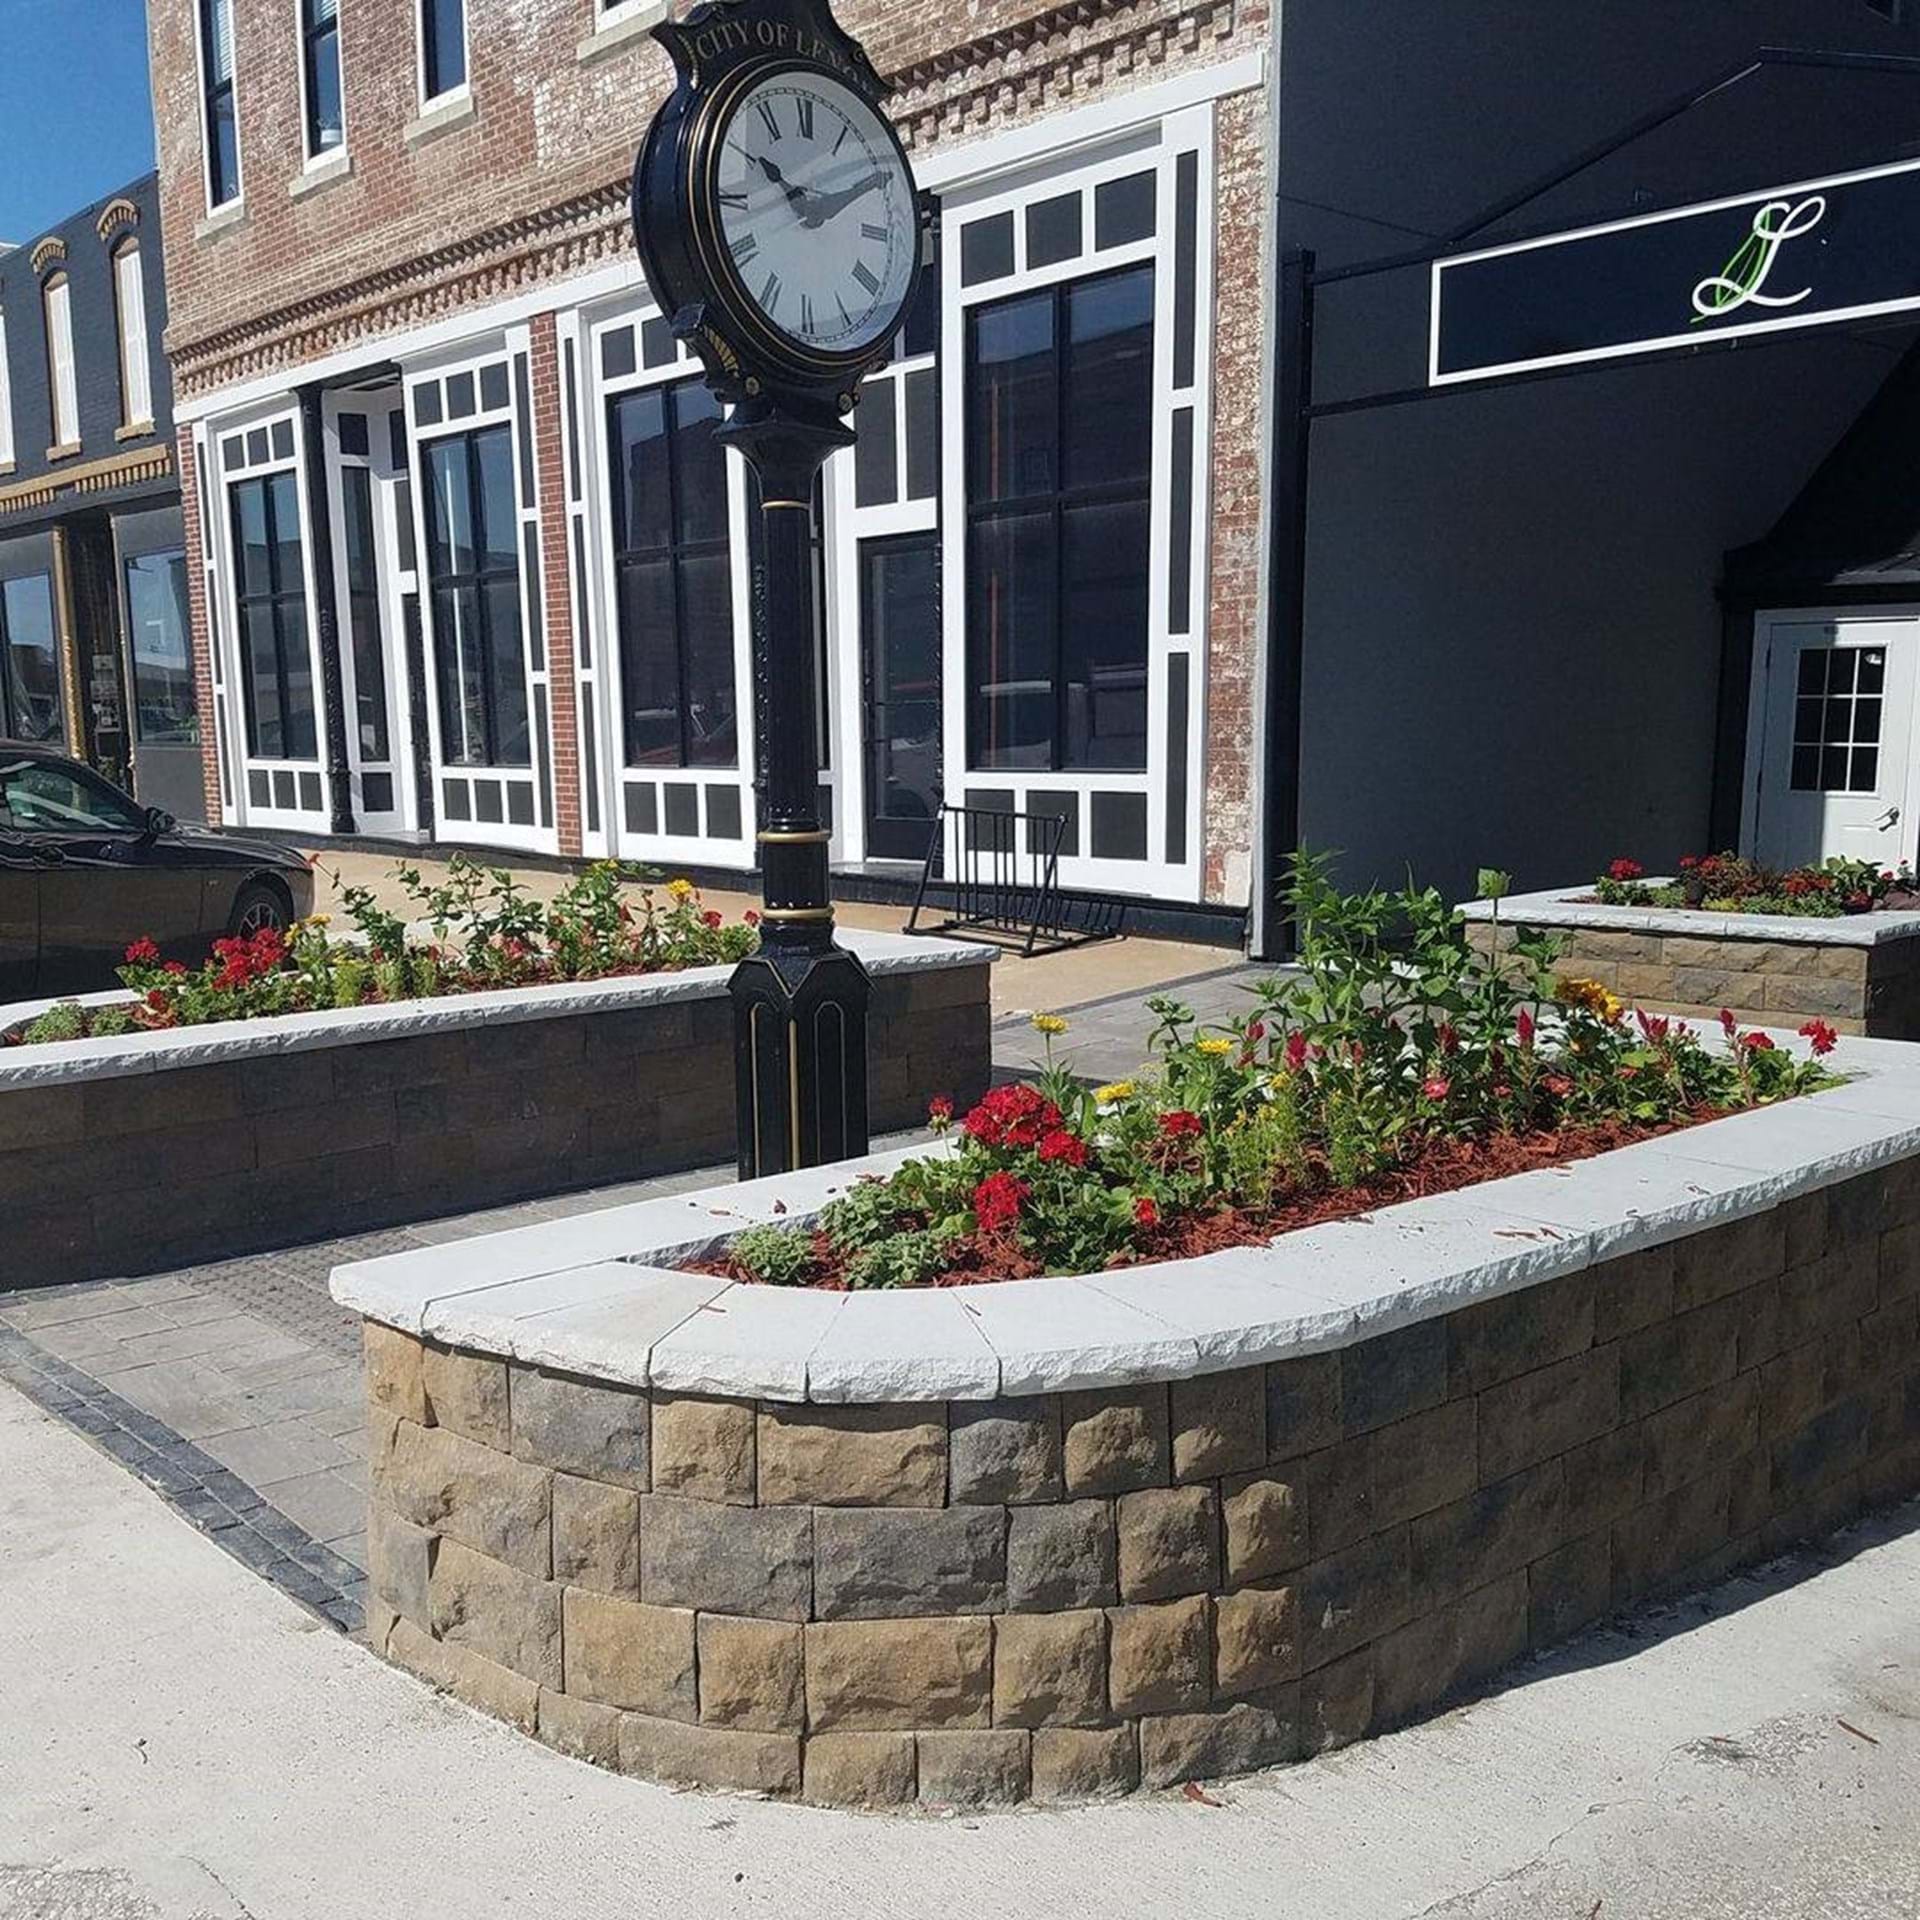 Vintage-style clock sits between the curb bump-out planters